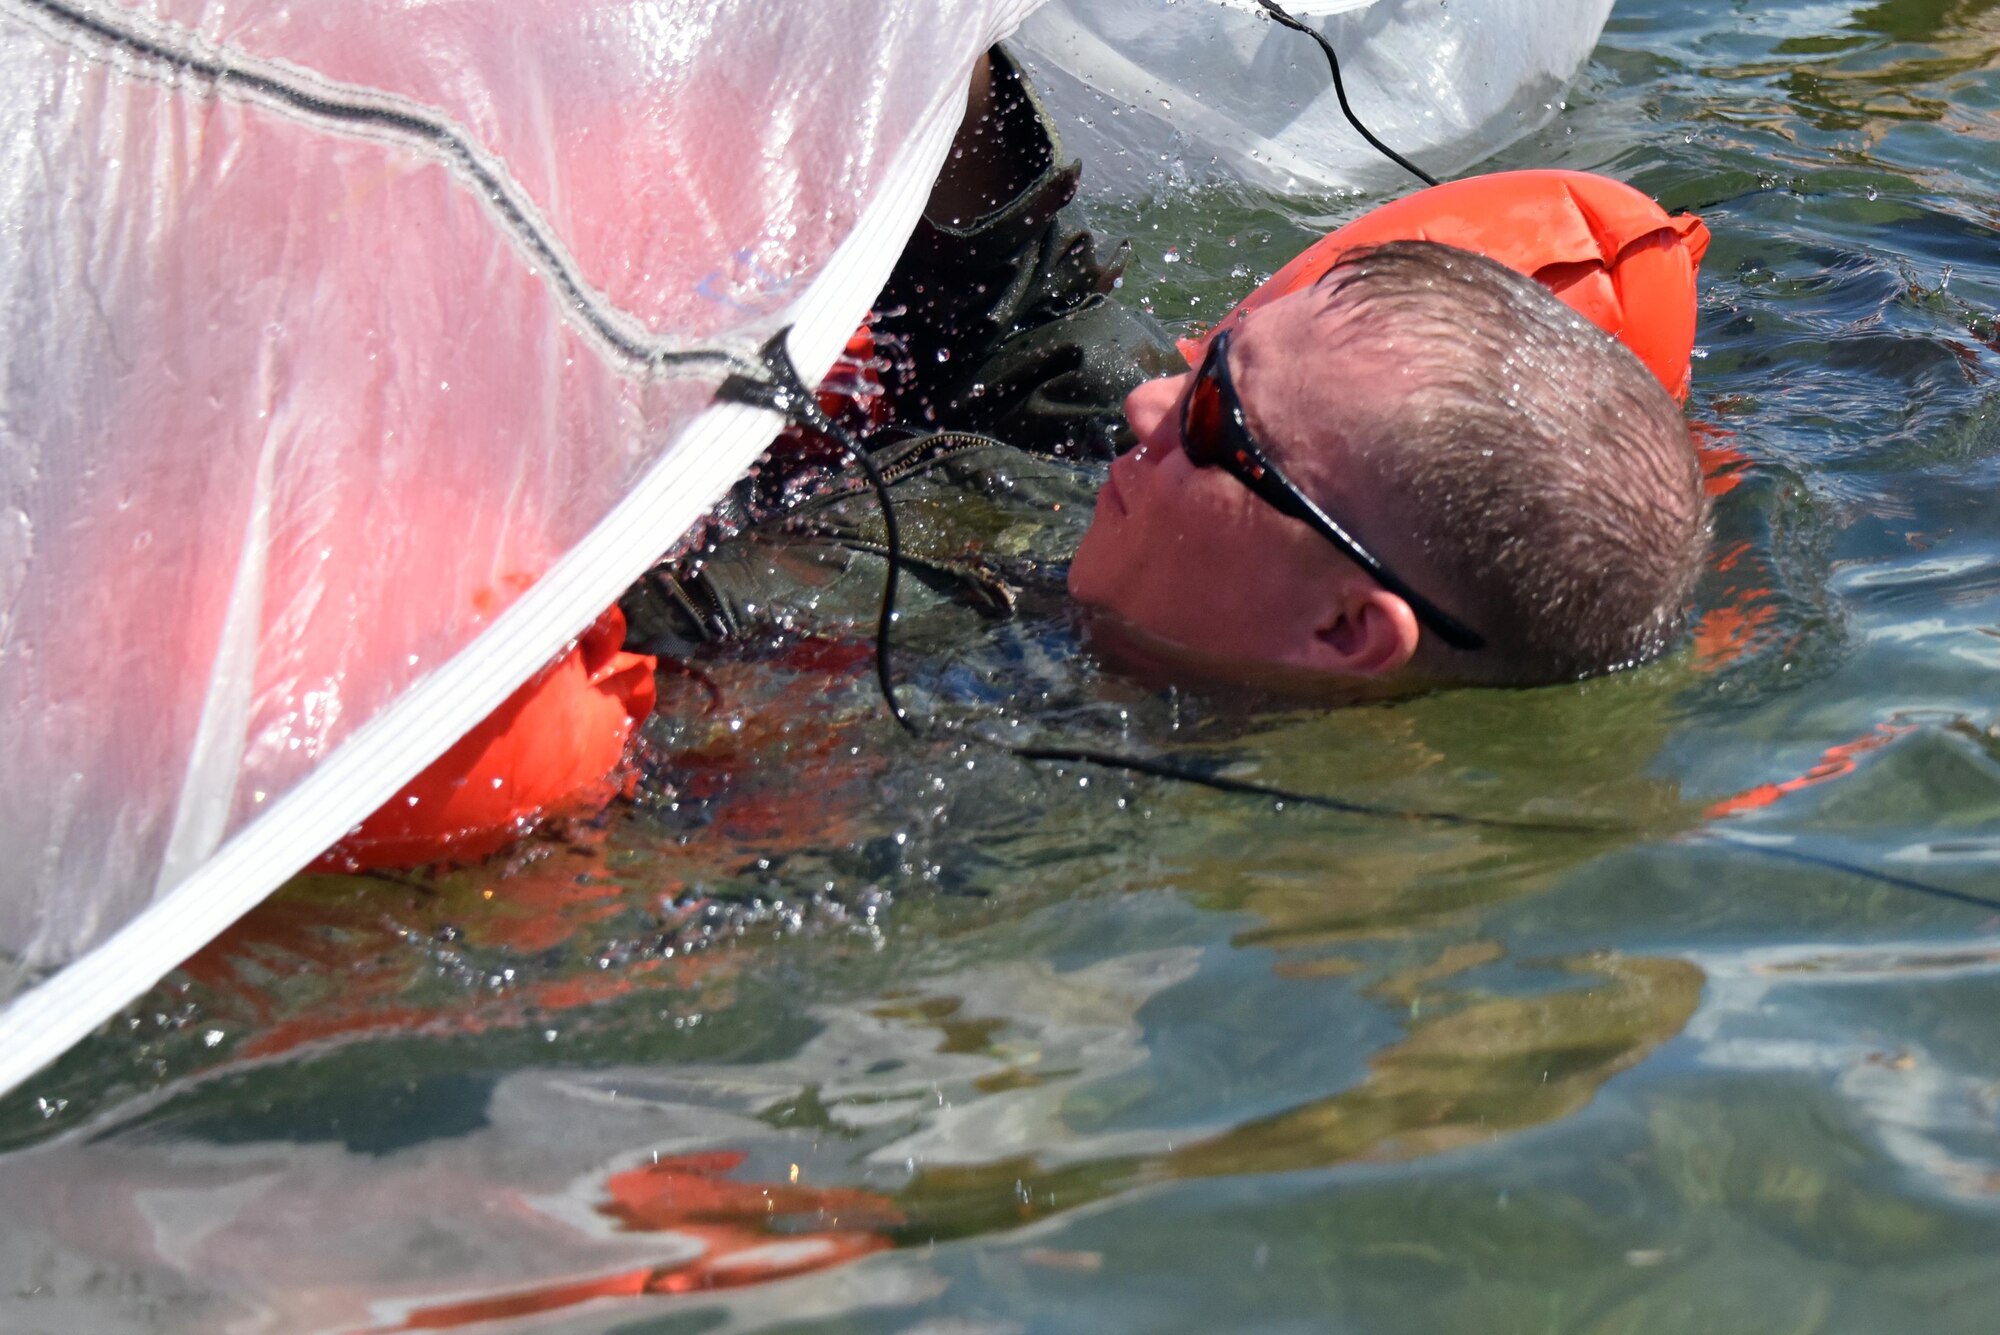 Master Sgt. Michael Thomas, load master with the 911th Operations Group, emerges from beneath a parachute during disentanglement training at Naval Air Station Key West, Florida, August 18, 2016. Airmen swam beneath the parachute to familiarize themselves with the situation and to practice removing themselves in case of an emergency. (U.S. Air Force photo by Staff Sgt. Marjorie A. Bowlden)